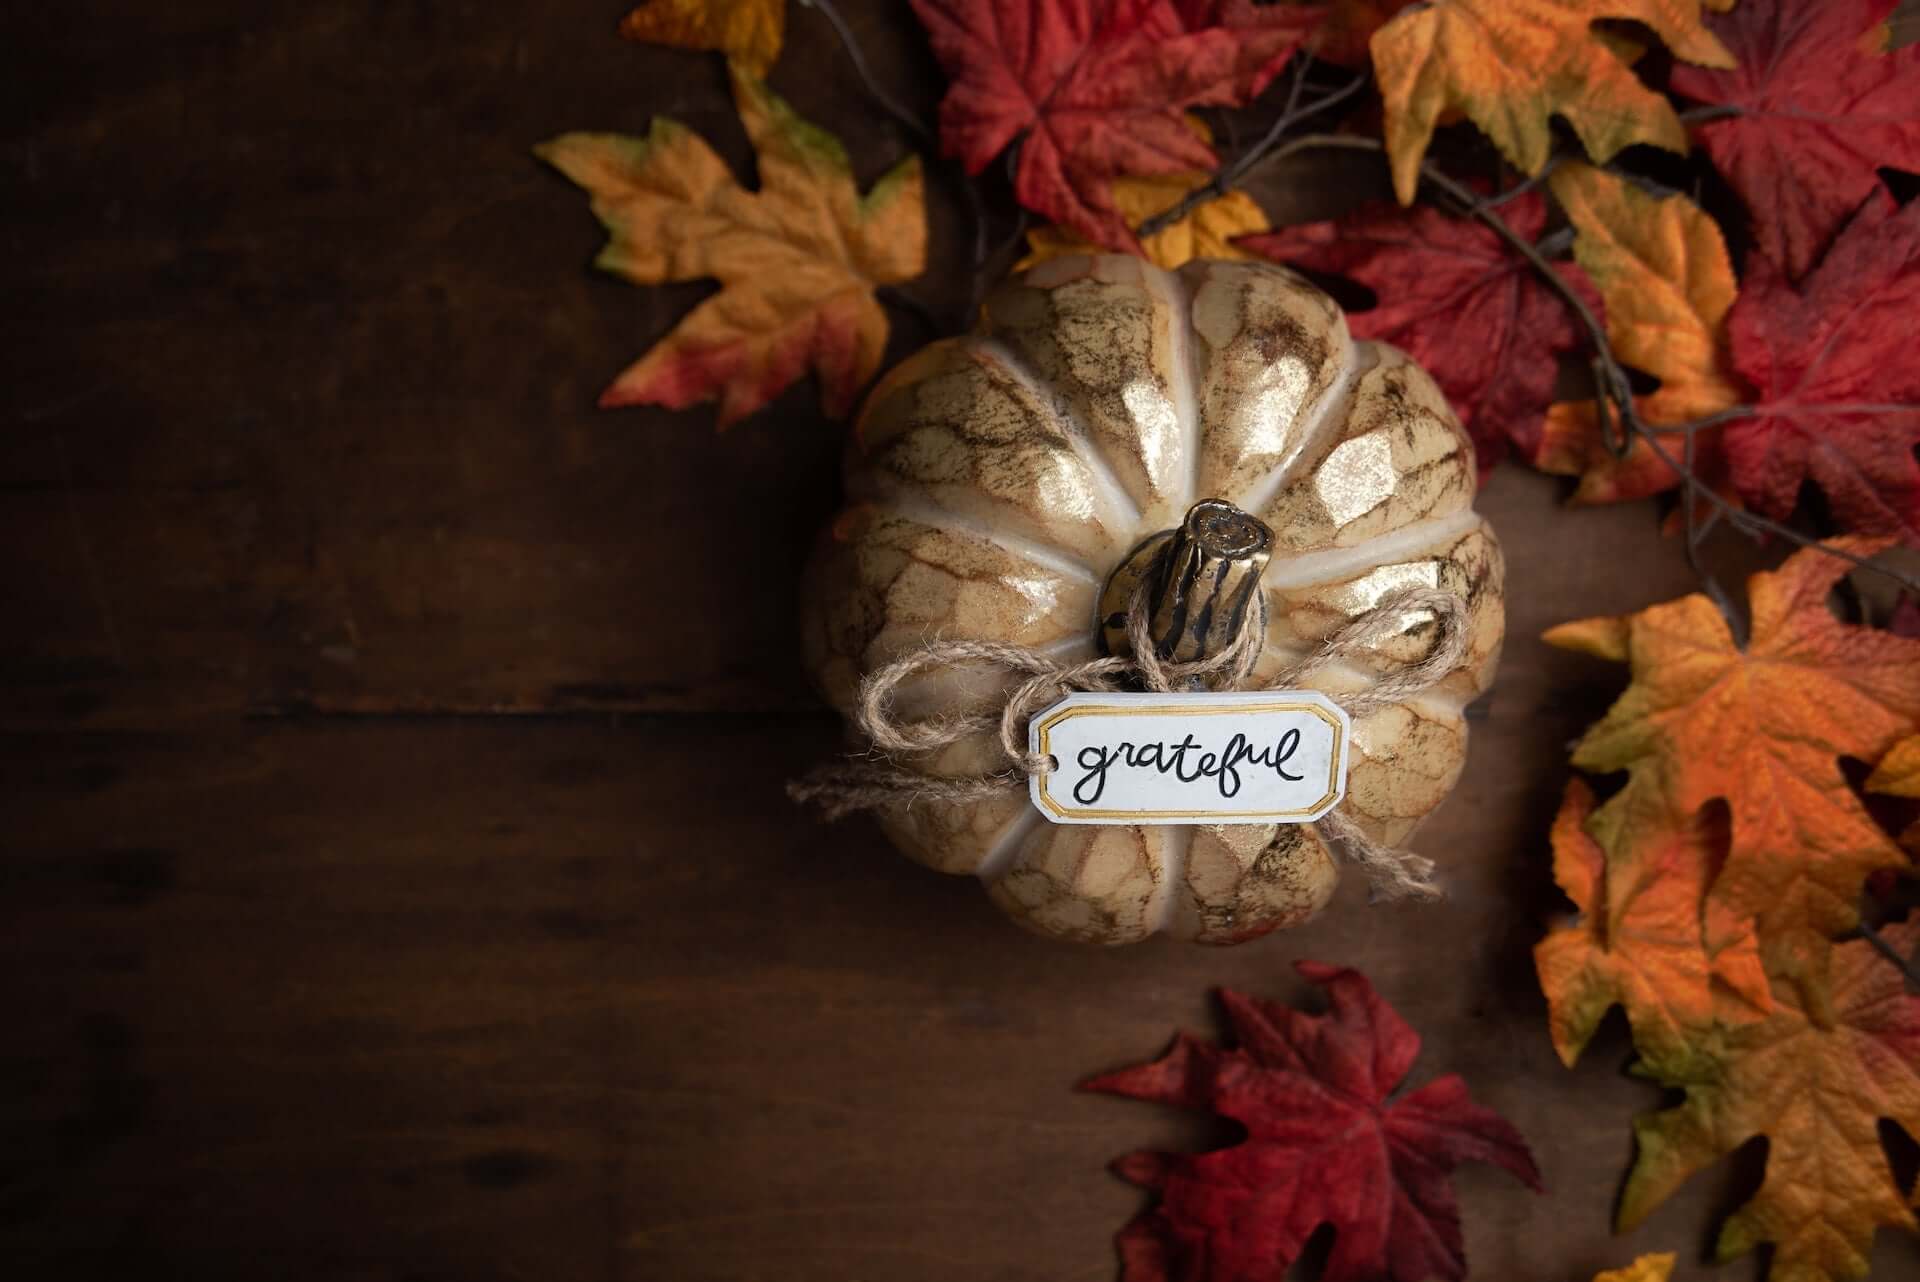 A decorative gold pumpkin with a small label reading "grateful" in looping script.